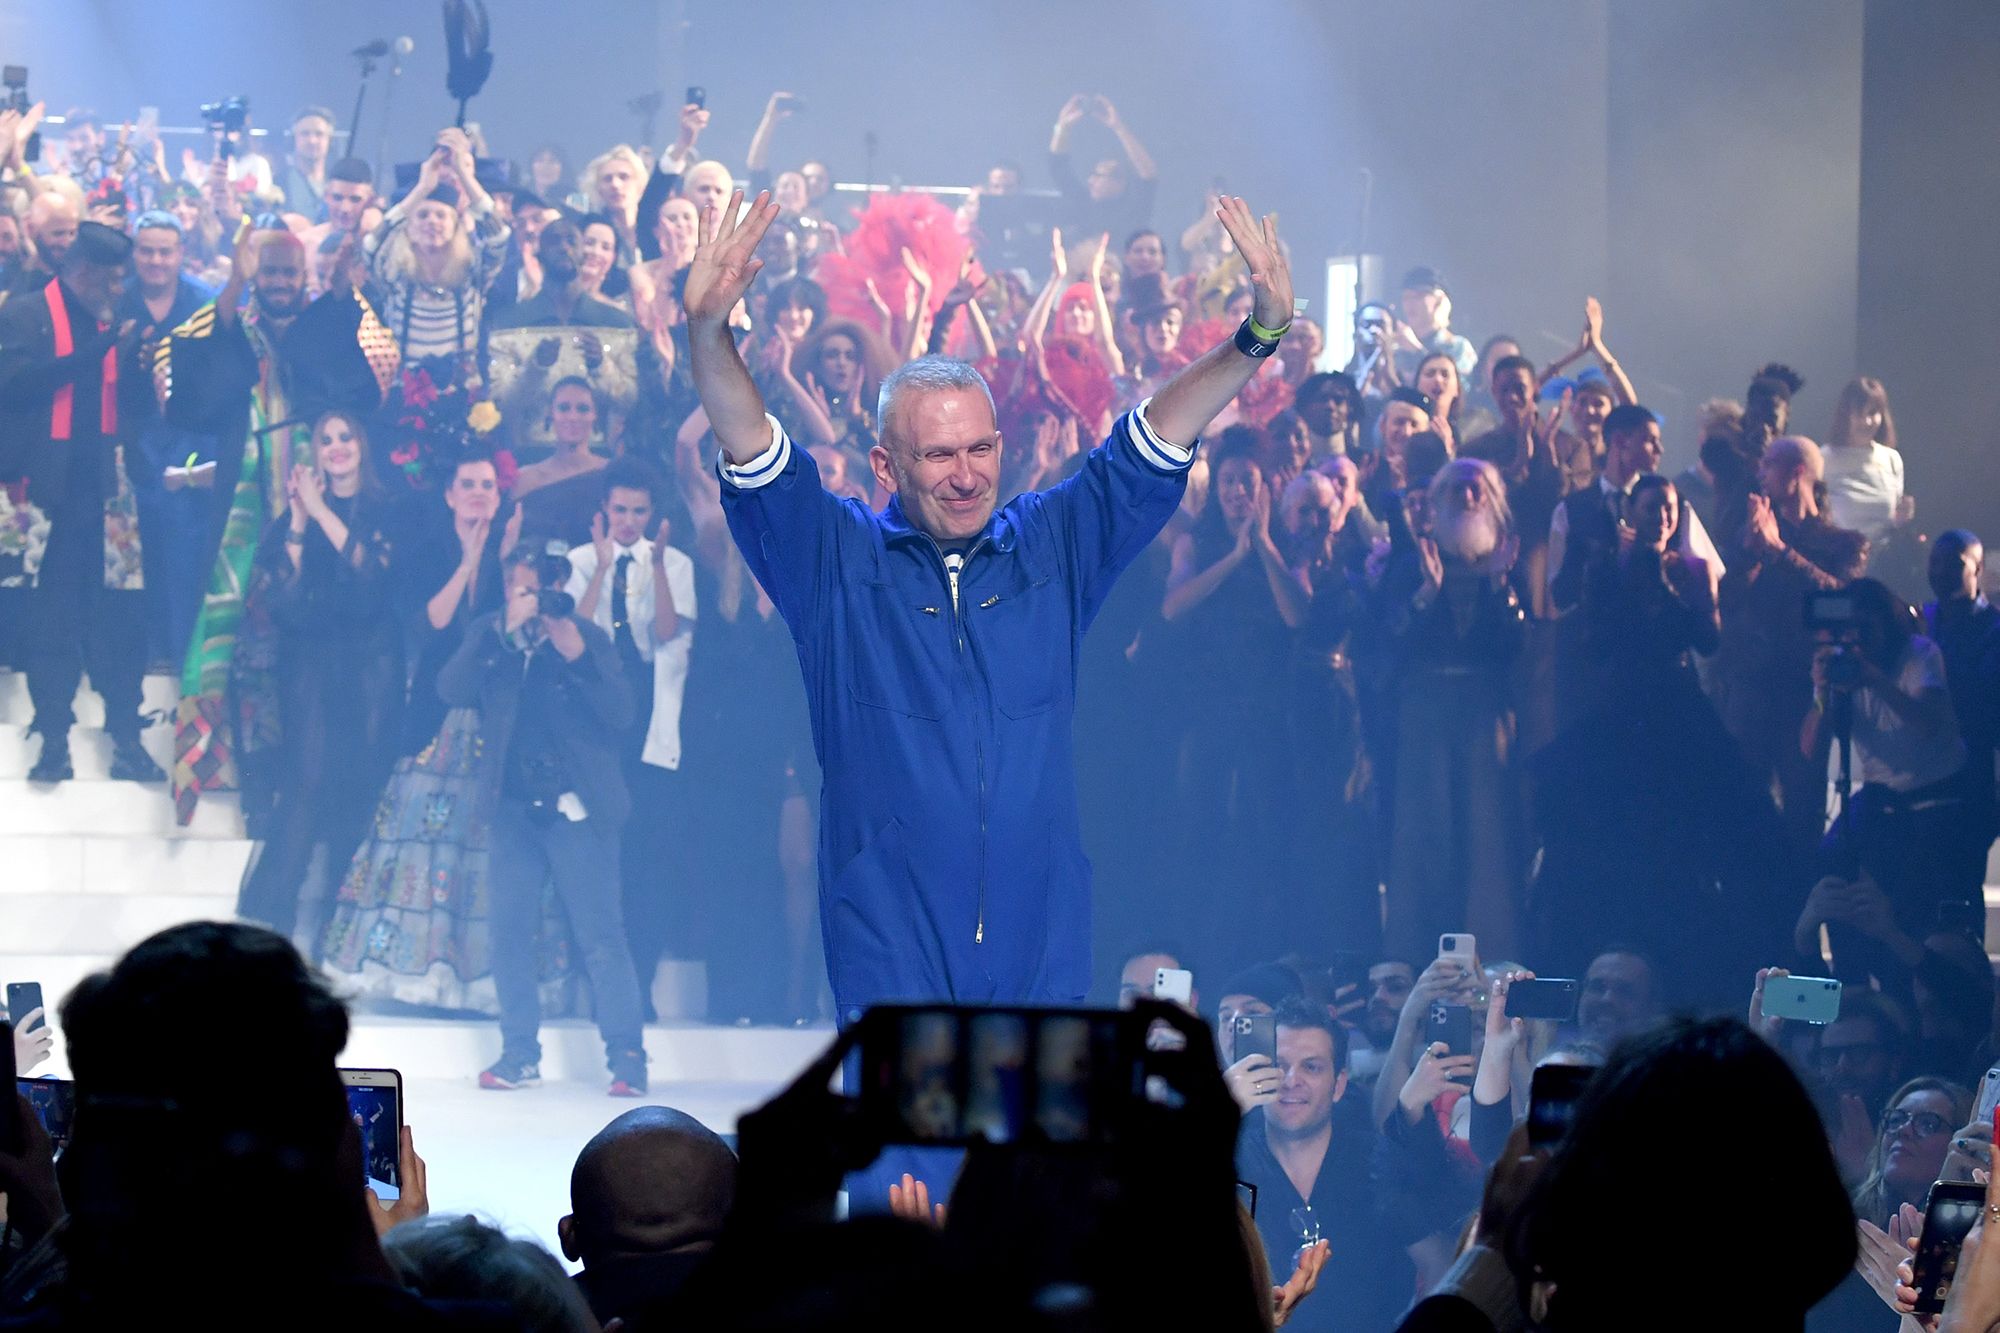 Jean Paul Gaultier bows out with final, spectacular runway show